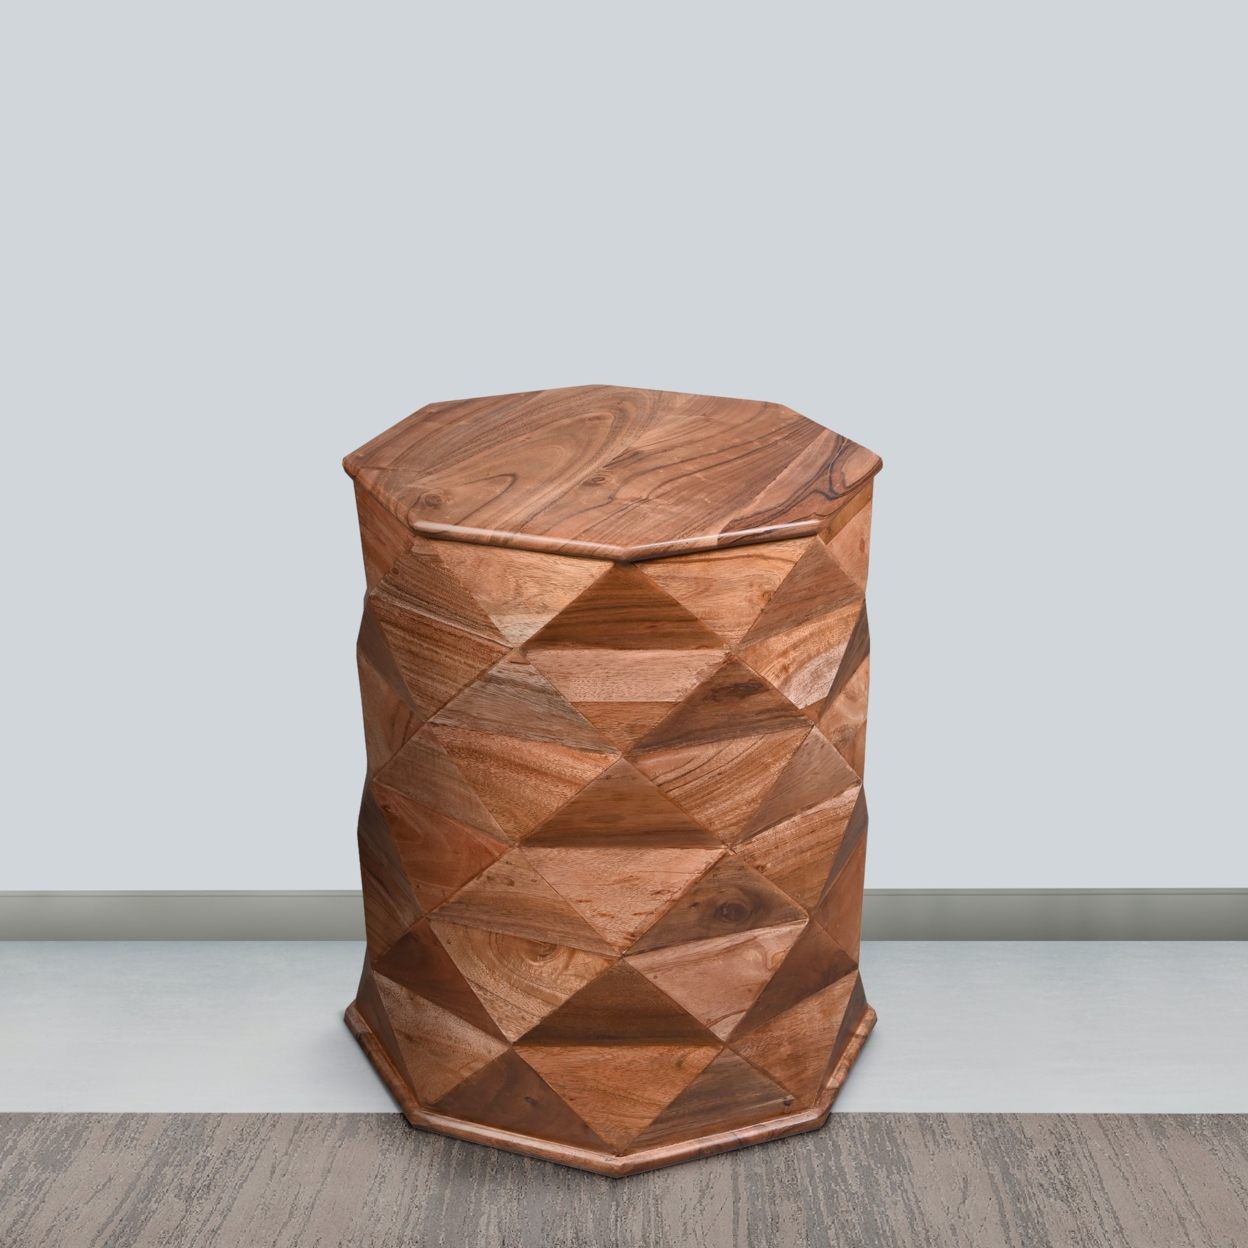 23 Inch Handcrafted Drum Side Accent Table With A Multifaceted Diamond Cut Design, Natural Brown Acacia Wood- Saltoro Sherpi